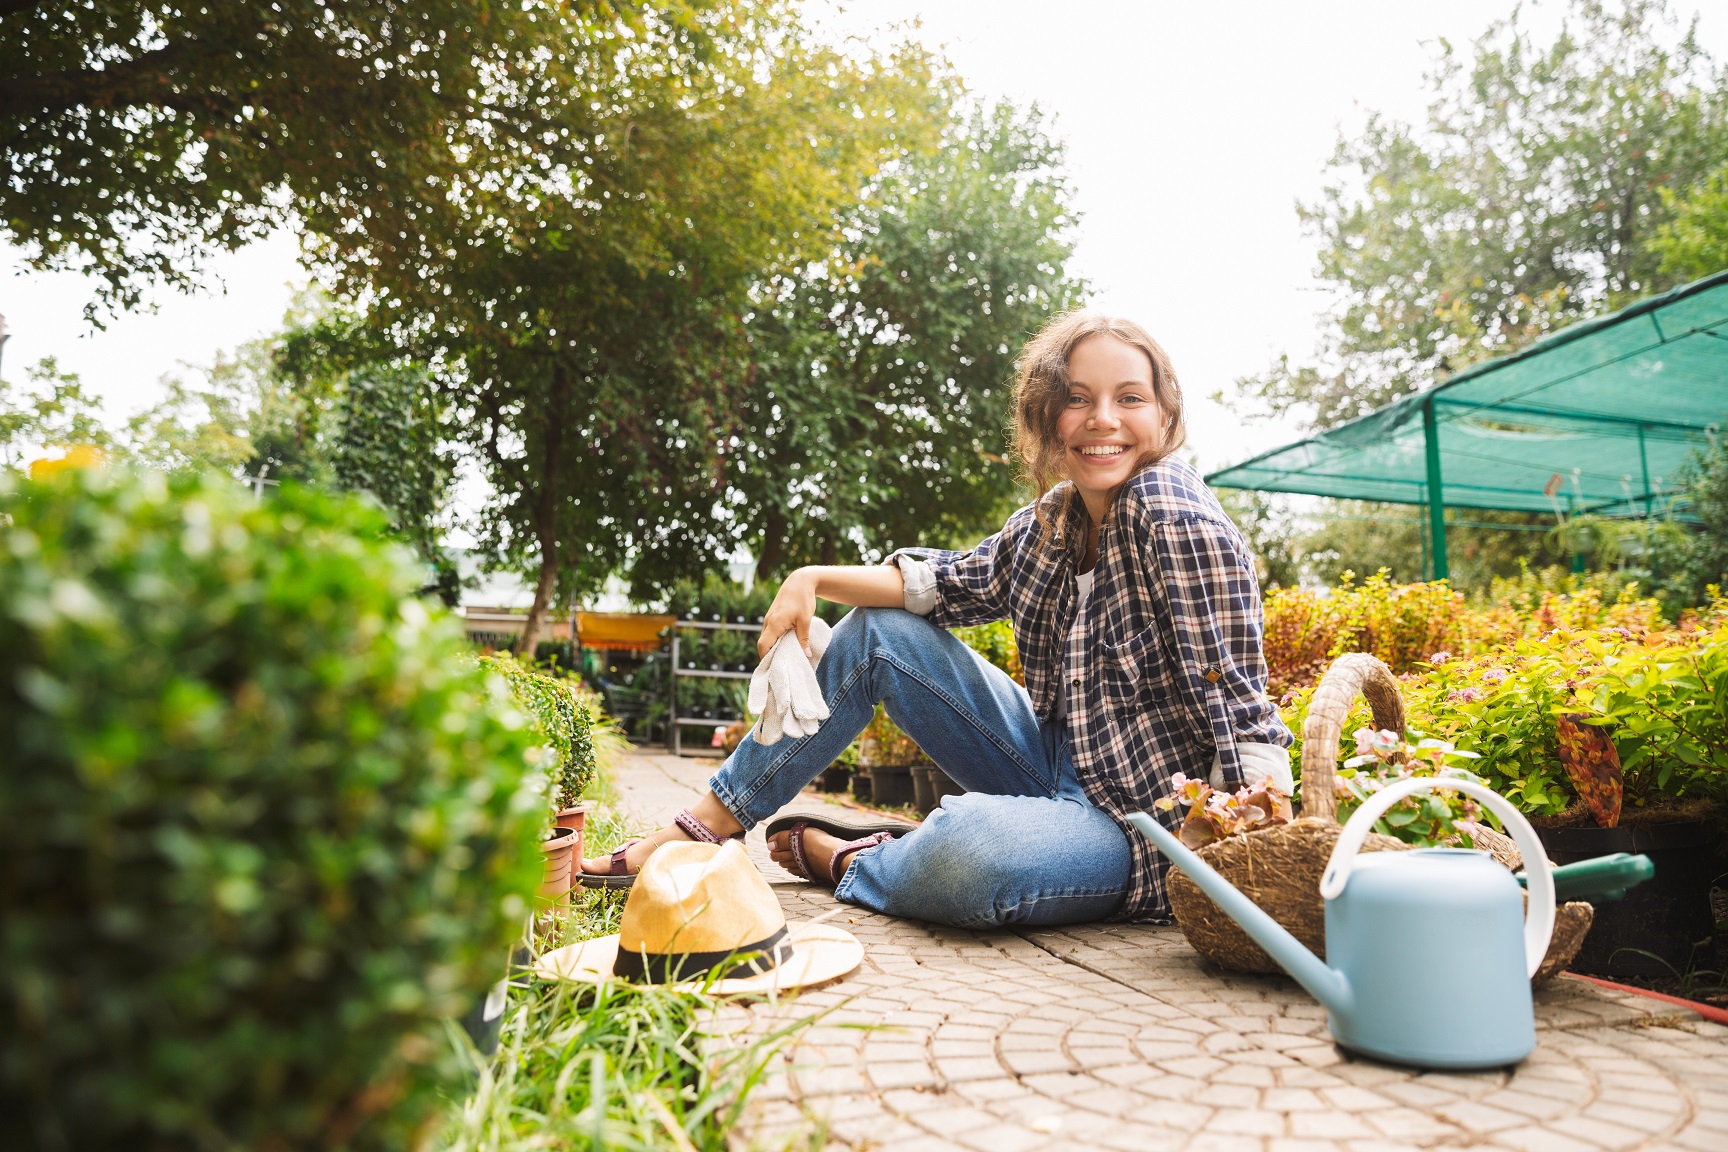 The garden effect: How to maintain a garden-effect in the house